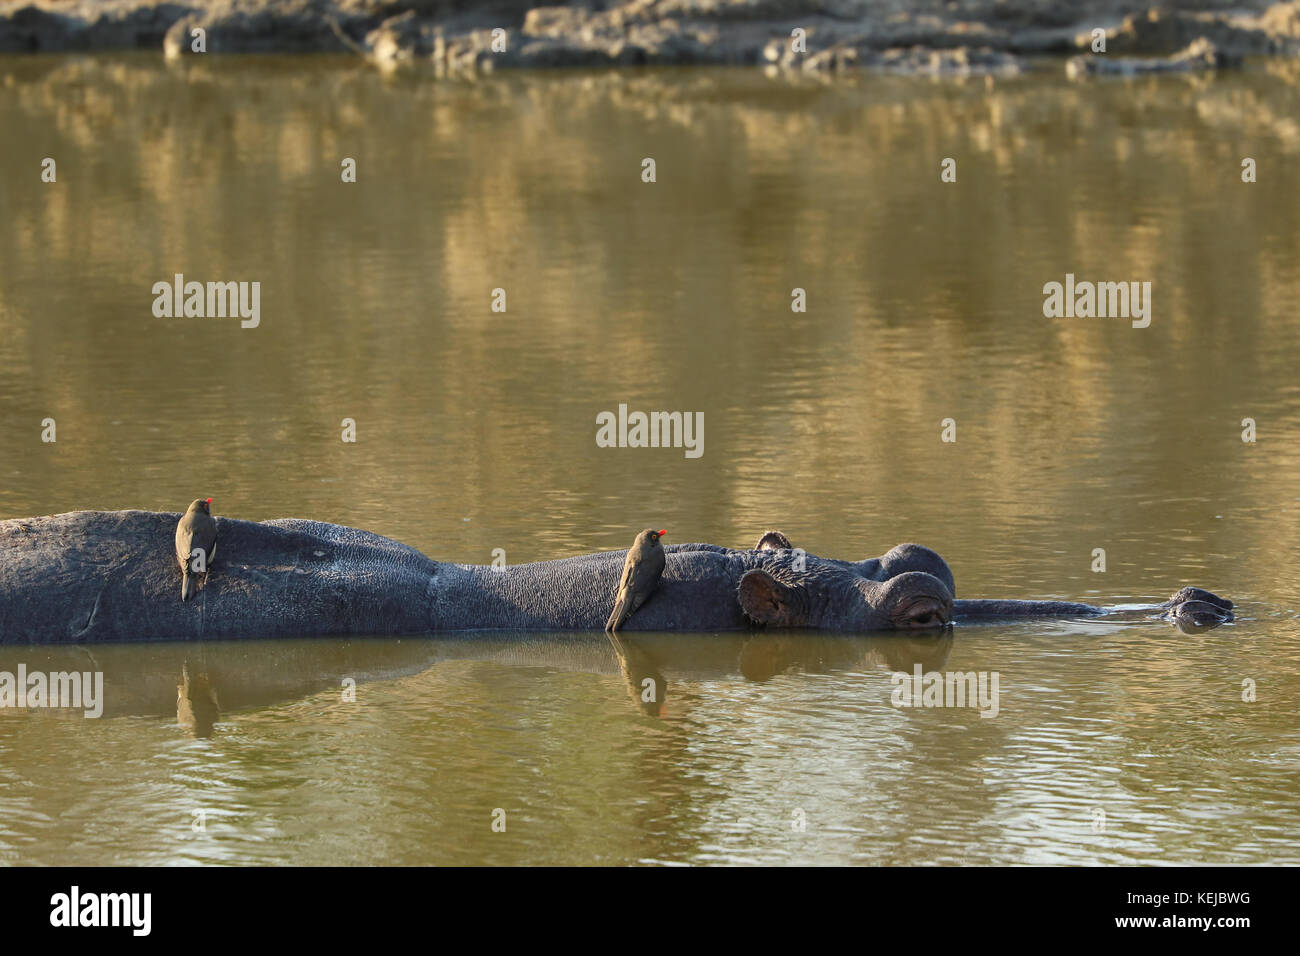 Hippopotamus with turtles on the back swimming in Sabie River, Kruger National Park, South Africa Stock Photo